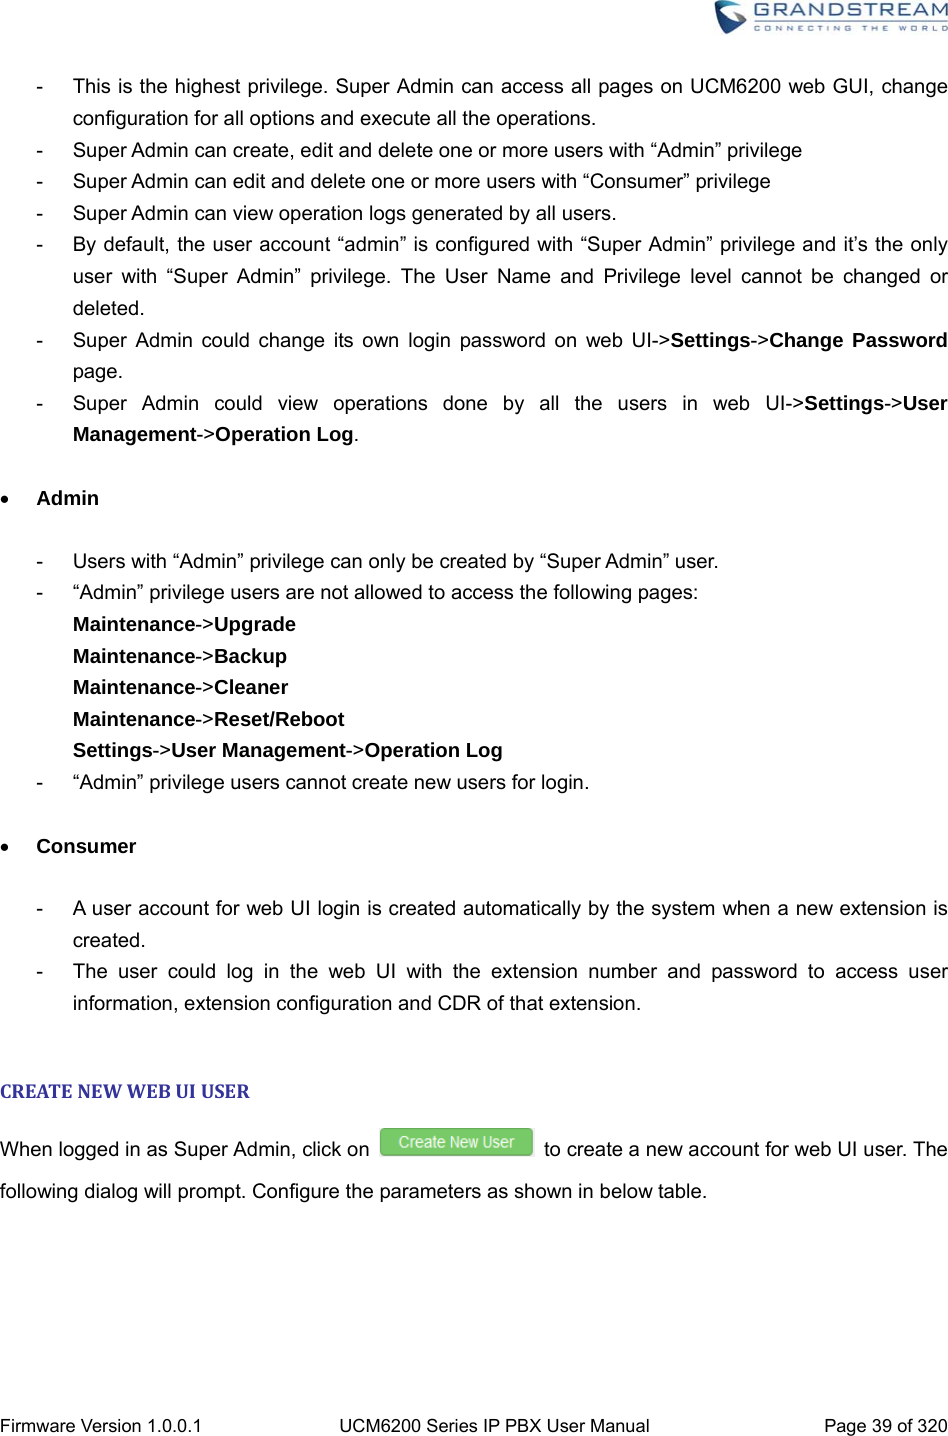  Firmware Version 1.0.0.1  UCM6200 Series IP PBX User Manual  Page 39 of 320 -  This is the highest privilege. Super Admin can access all pages on UCM6200 web GUI, change configuration for all options and execute all the operations. -  Super Admin can create, edit and delete one or more users with “Admin” privilege -  Super Admin can edit and delete one or more users with “Consumer” privilege -  Super Admin can view operation logs generated by all users. -  By default, the user account “admin” is configured with “Super Admin” privilege and it’s the only user with “Super Admin” privilege. The User Name and Privilege level cannot be changed or deleted. -  Super Admin could change its own login password on web UI-&gt;Settings-&gt;Change Password page. -  Super Admin could view operations done by all the users in web UI-&gt;Settings-&gt;User Management-&gt;Operation Log.   Admin  -  Users with “Admin” privilege can only be created by “Super Admin” user. -  “Admin” privilege users are not allowed to access the following pages: Maintenance-&gt;Upgrade Maintenance-&gt;Backup Maintenance-&gt;Cleaner Maintenance-&gt;Reset/Reboot Settings-&gt;User Management-&gt;Operation Log -  “Admin” privilege users cannot create new users for login.     Consumer  -  A user account for web UI login is created automatically by the system when a new extension is created. -  The user could log in the web UI with the extension number and password to access user information, extension configuration and CDR of that extension.  CREATENEWWEBUIUSERWhen logged in as Super Admin, click on    to create a new account for web UI user. The following dialog will prompt. Configure the parameters as shown in below table. 